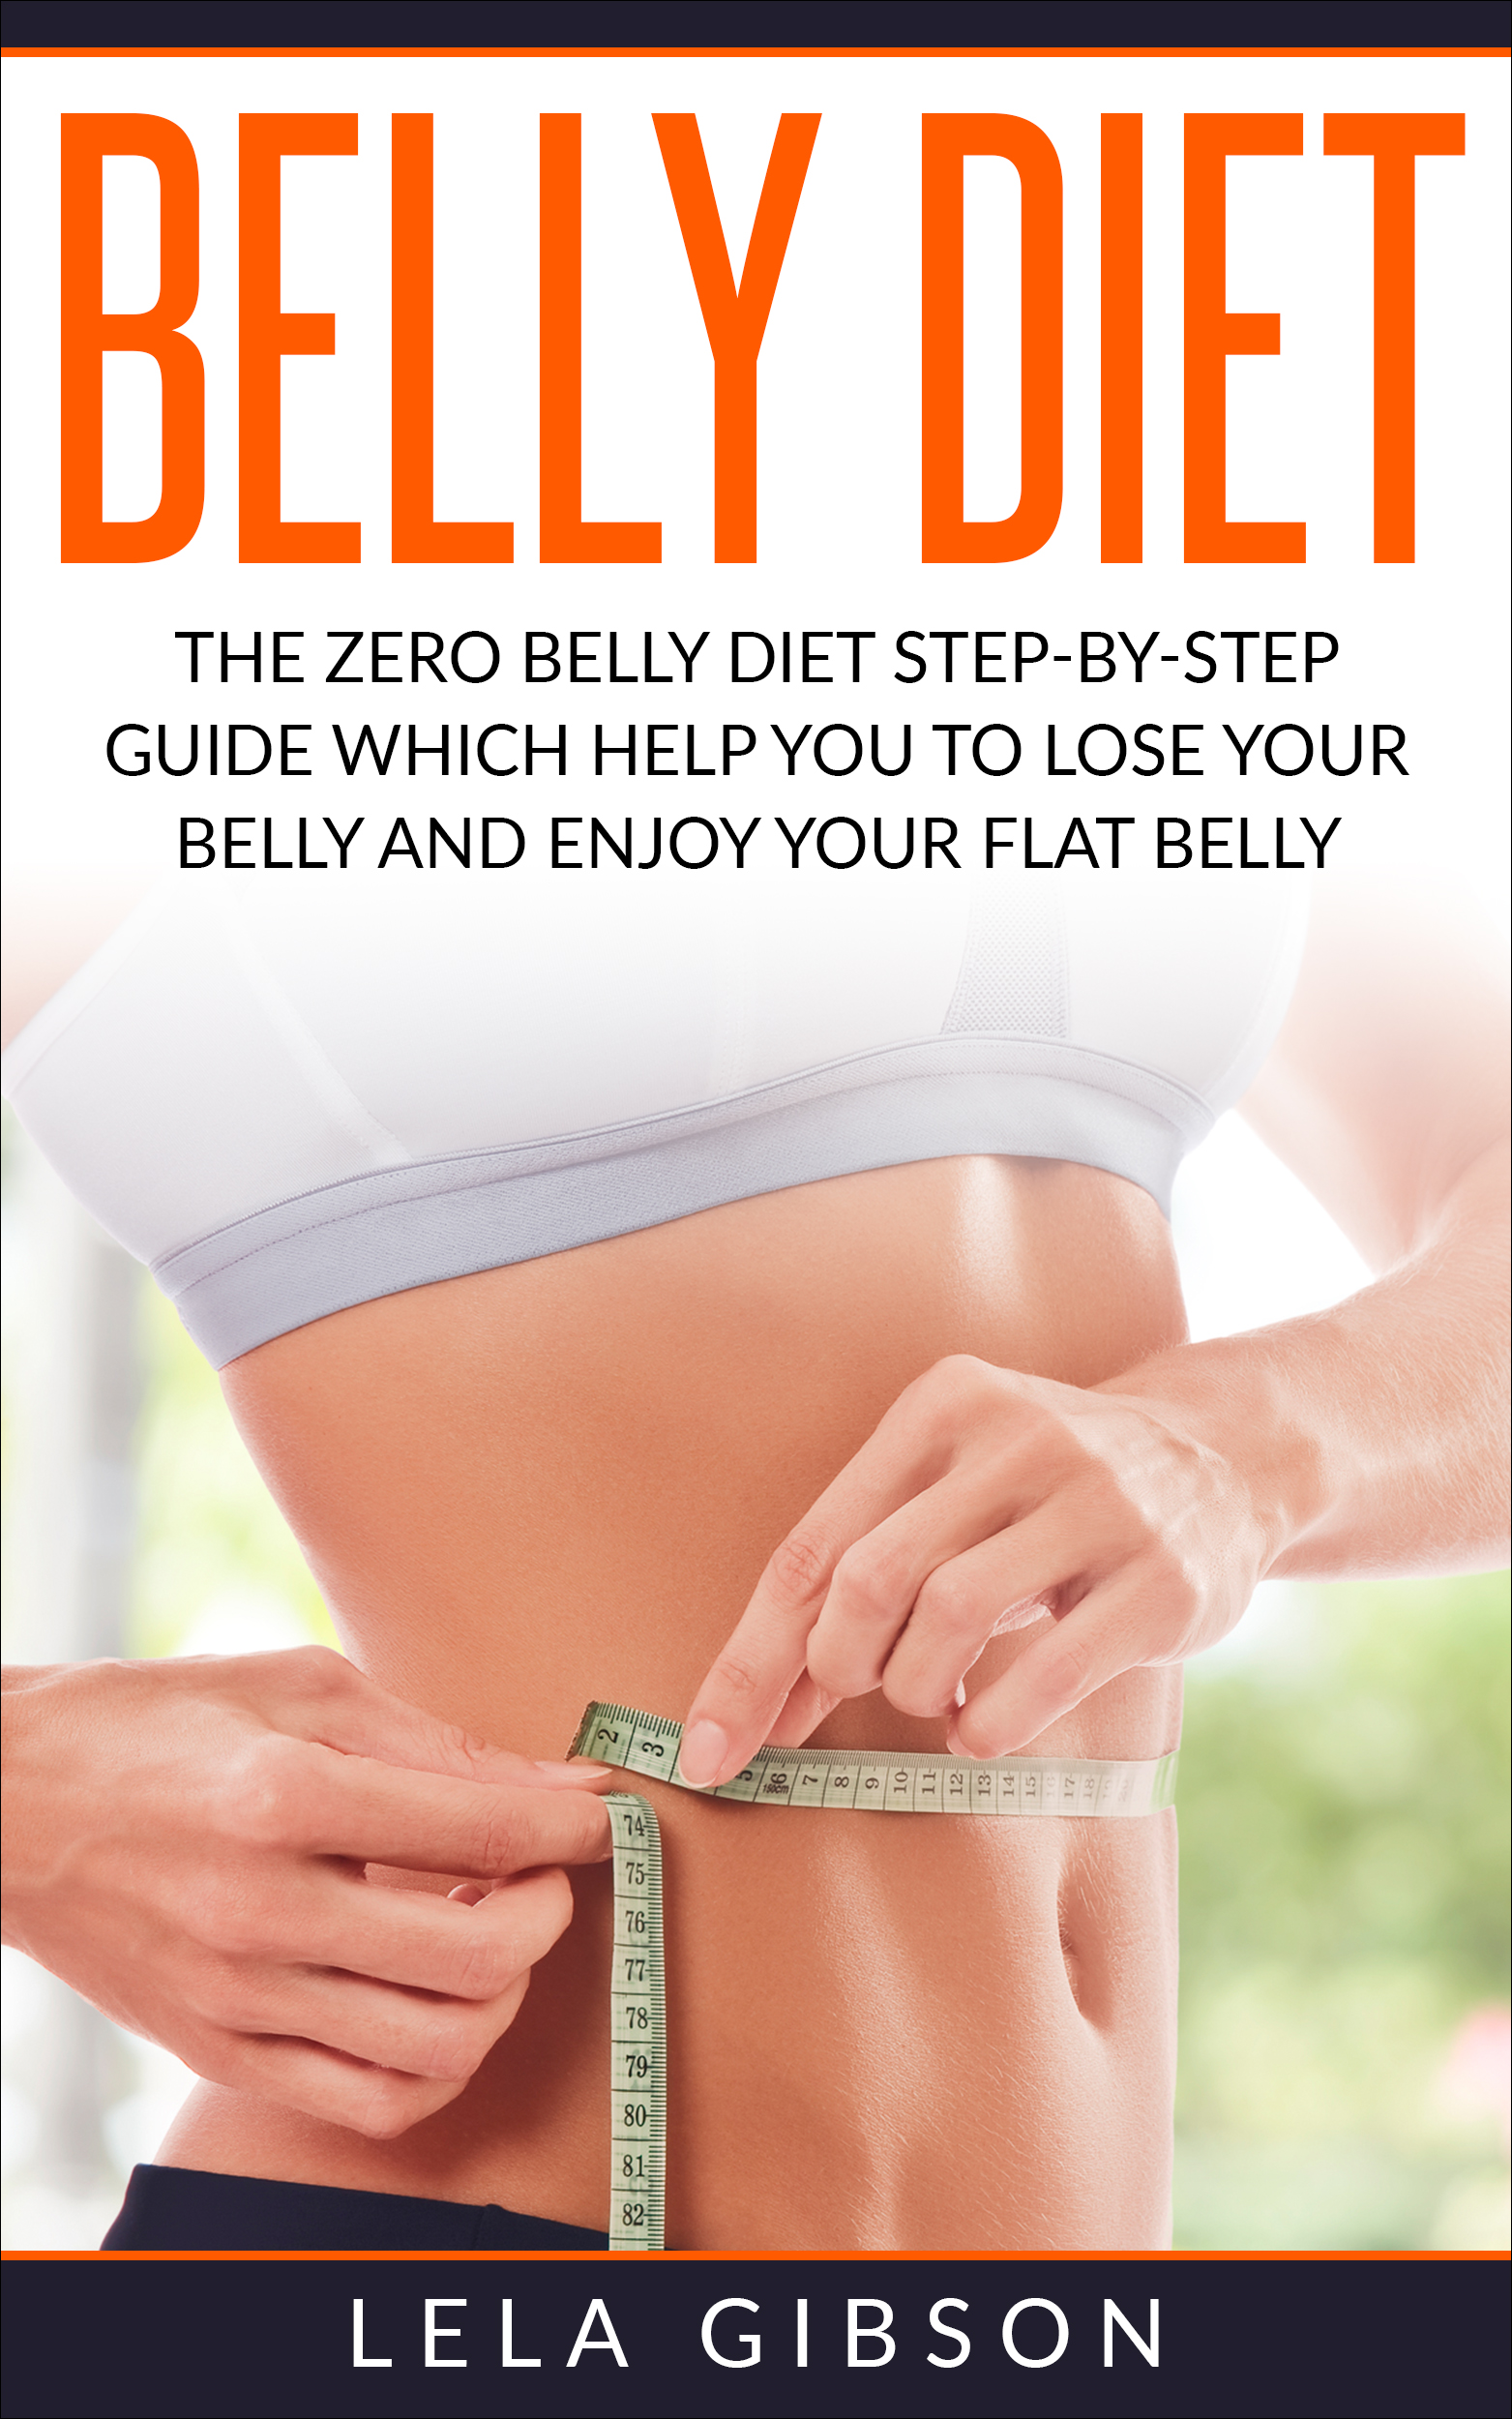 FREE: Belly Diet: The Zero Belly Diet Step-By-Step Guide Which Helps You To Lose Your Belly And Enjoy Your Flat Belly by Lela Gibson